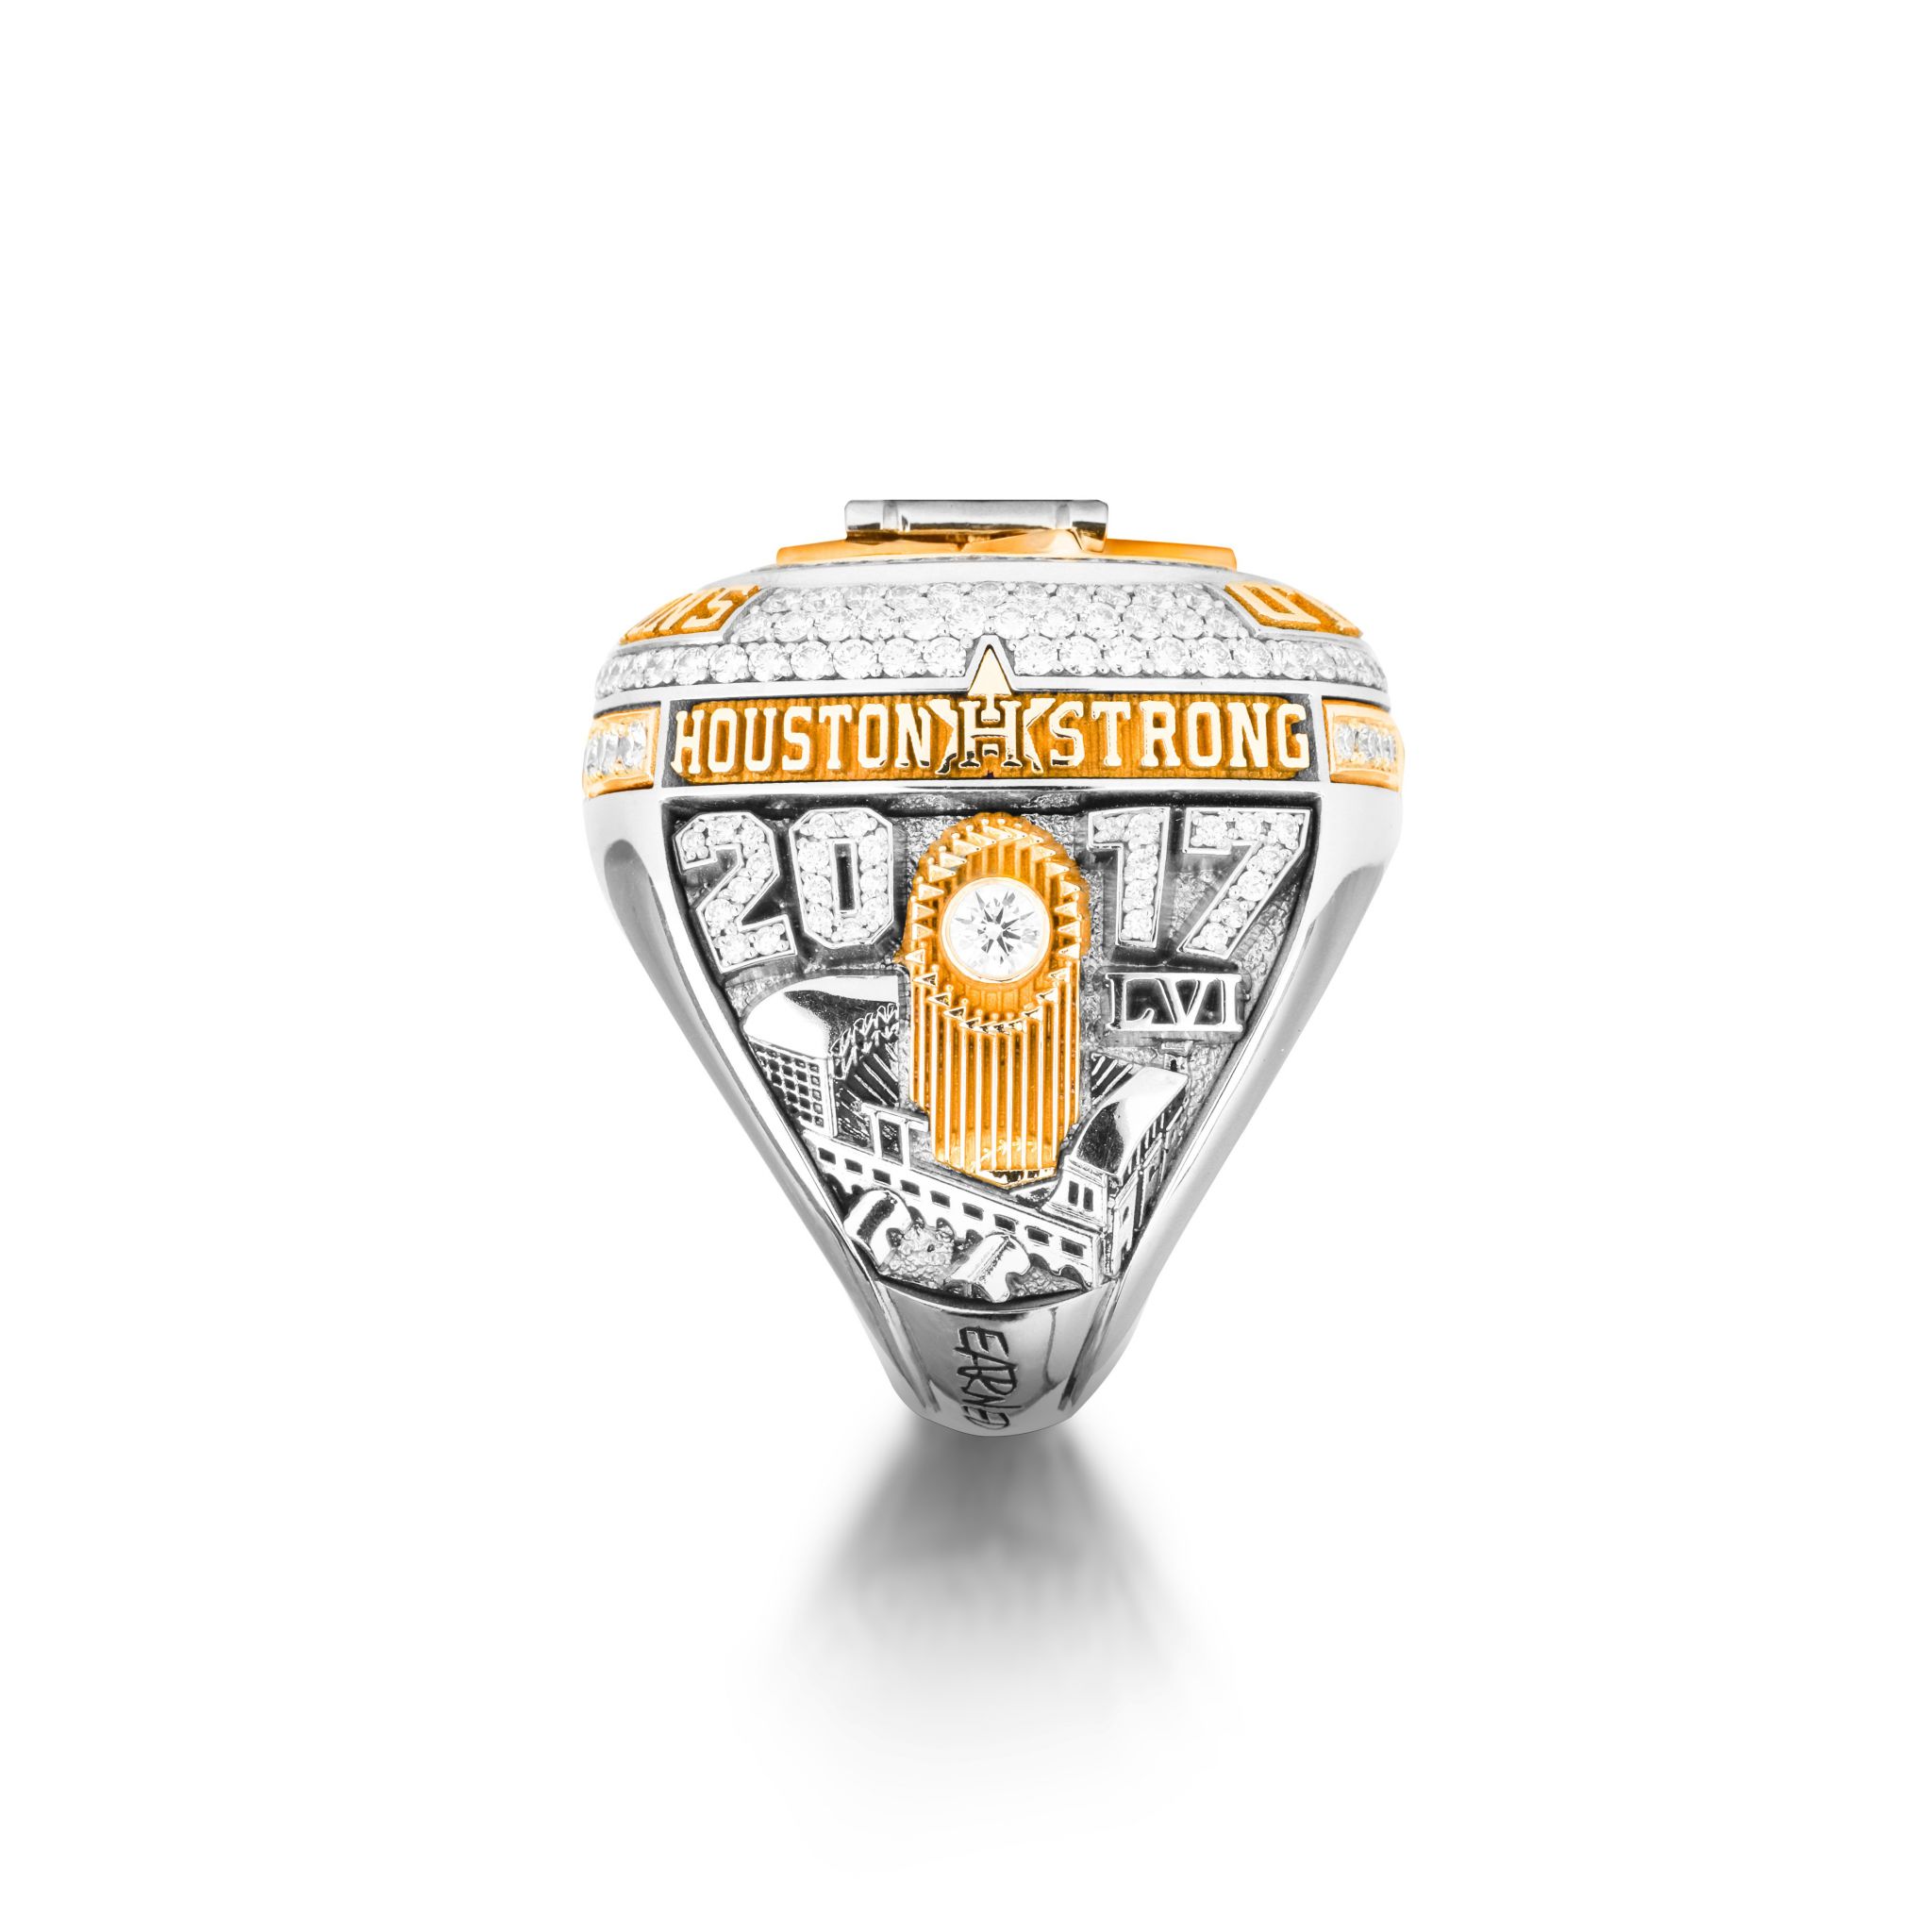 River Bandits to Give Away Replica World Series Rings